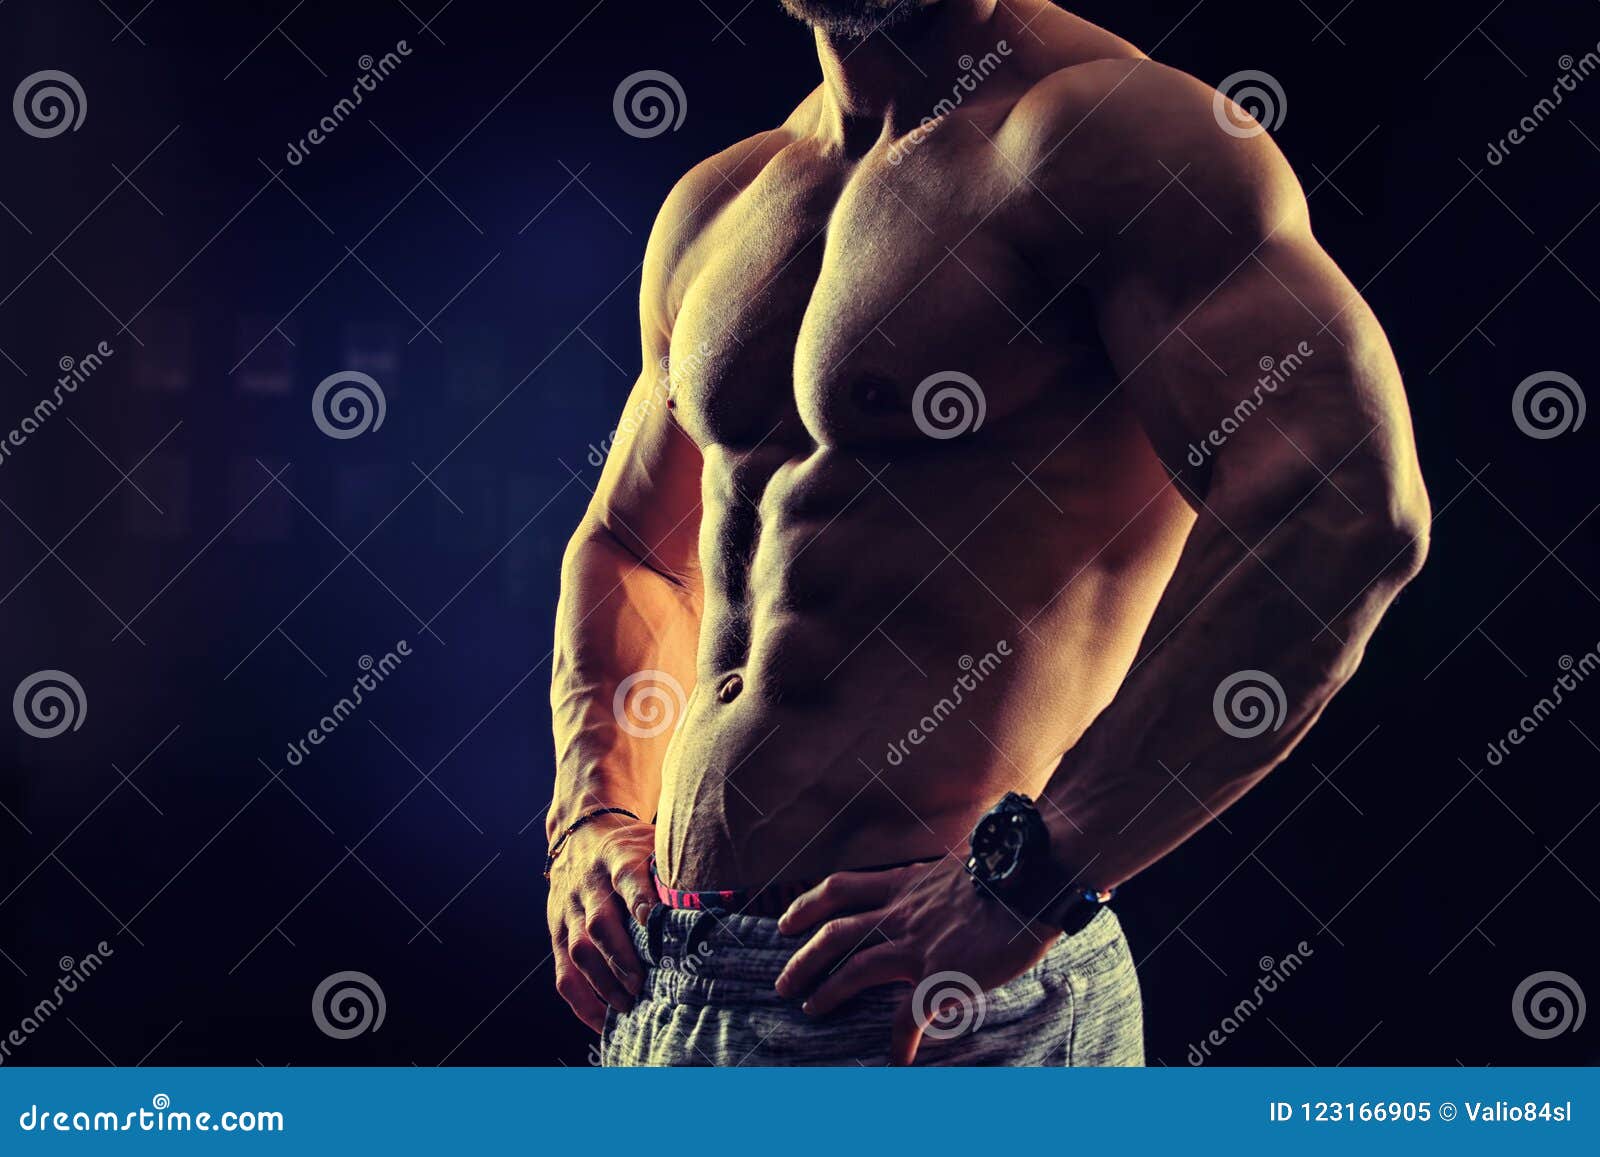 Bodybuilding Fitness Concept Strong Man Fit And Healthy Muscular Male Body With Abdominal Muscles Stock Image Image Of Healthy Health